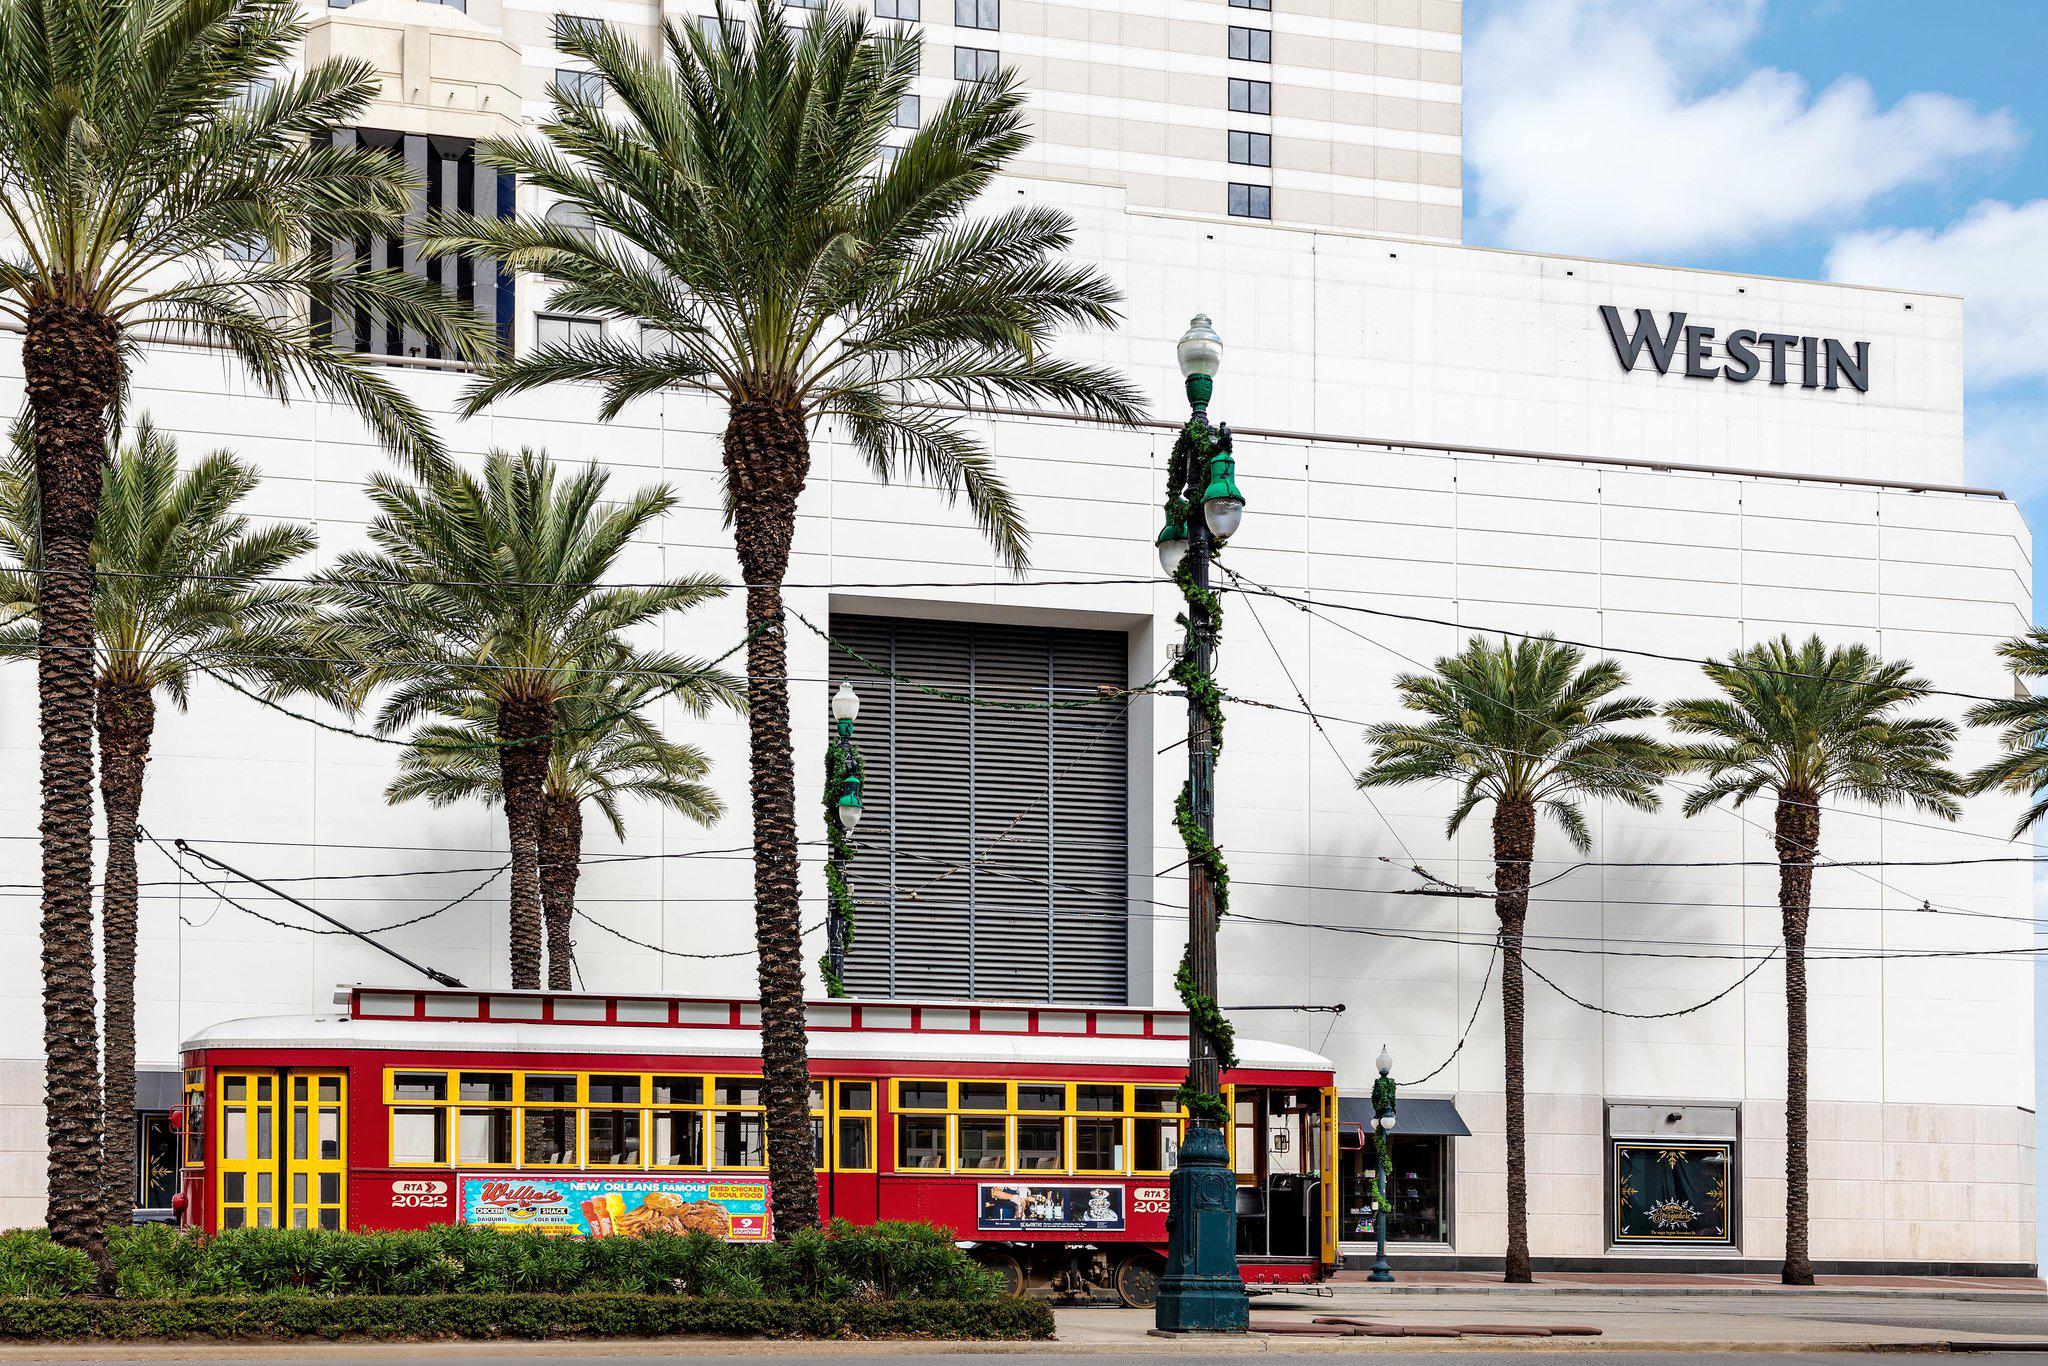 The Westin New Orleans Photo